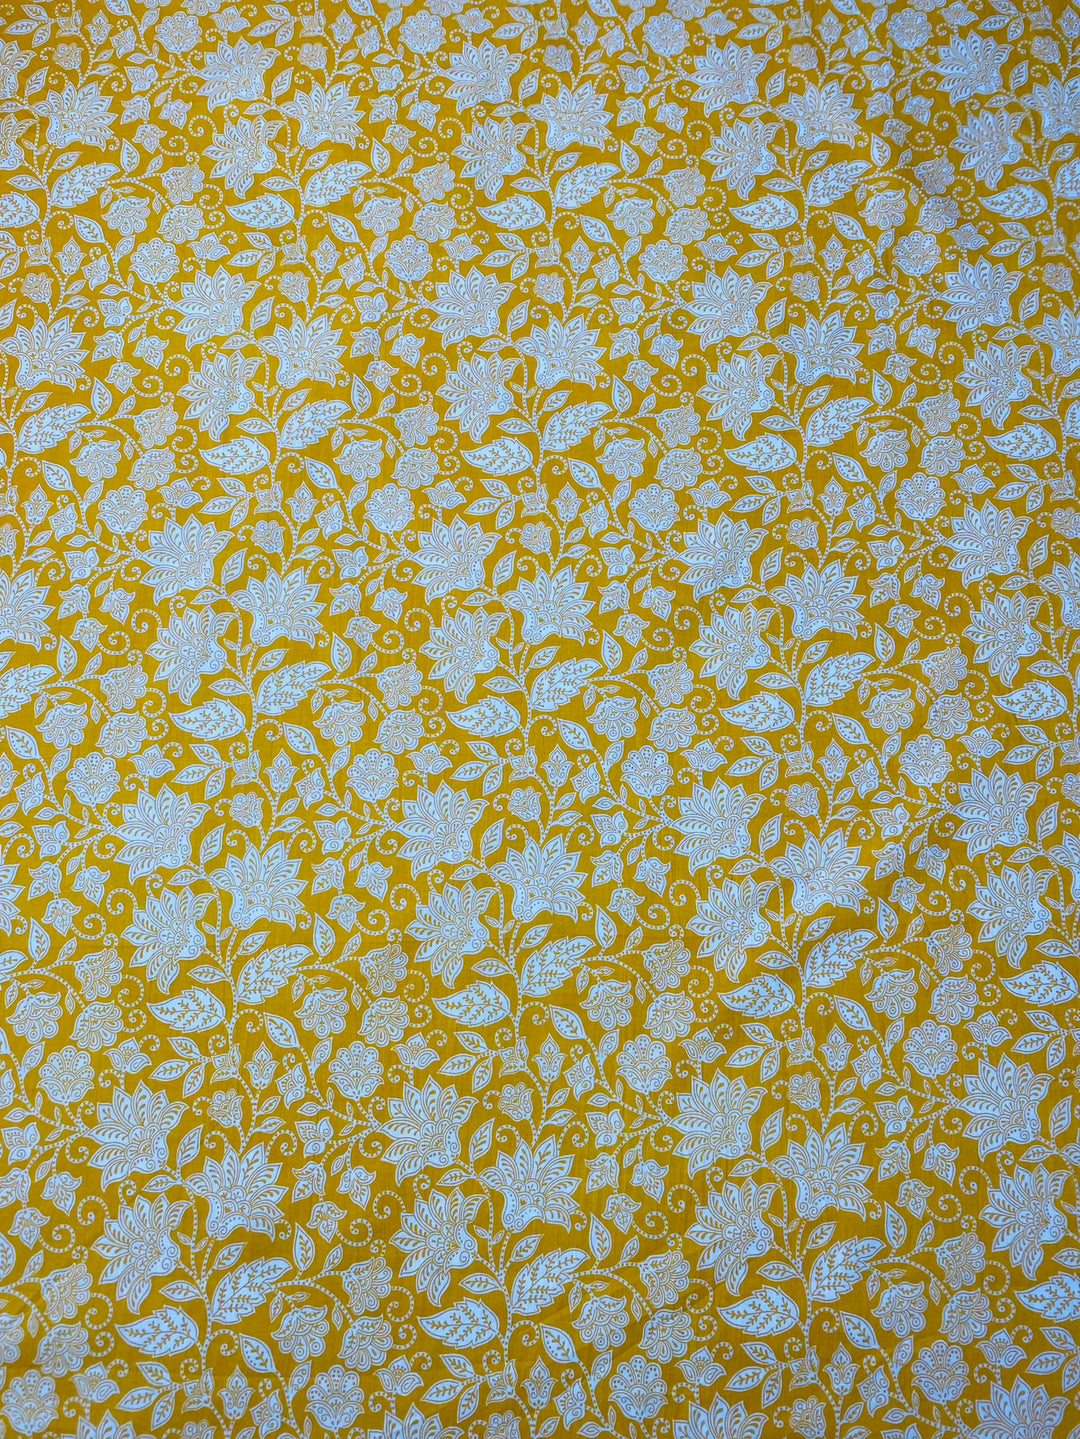 Printed Floral Cotton Fabric Yellow